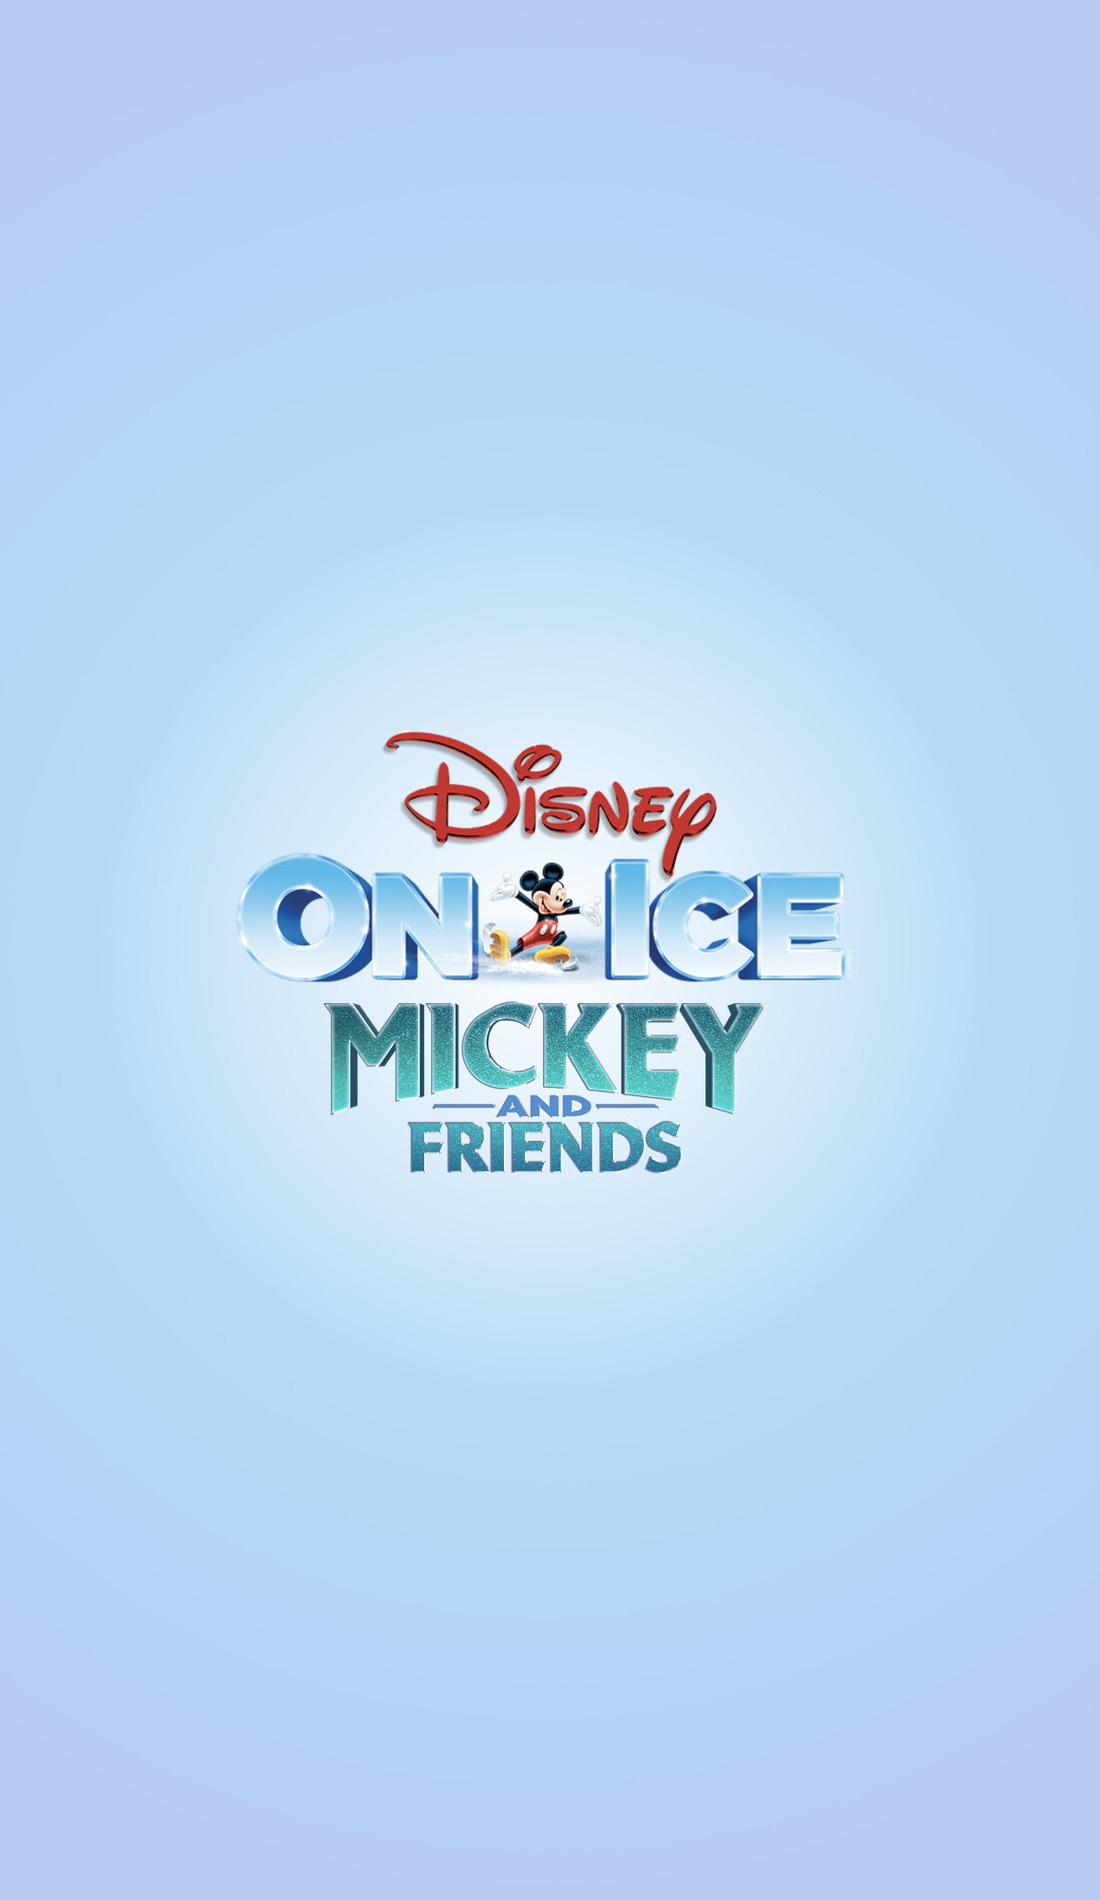 A Disney On Ice: Mickey and Friends live event